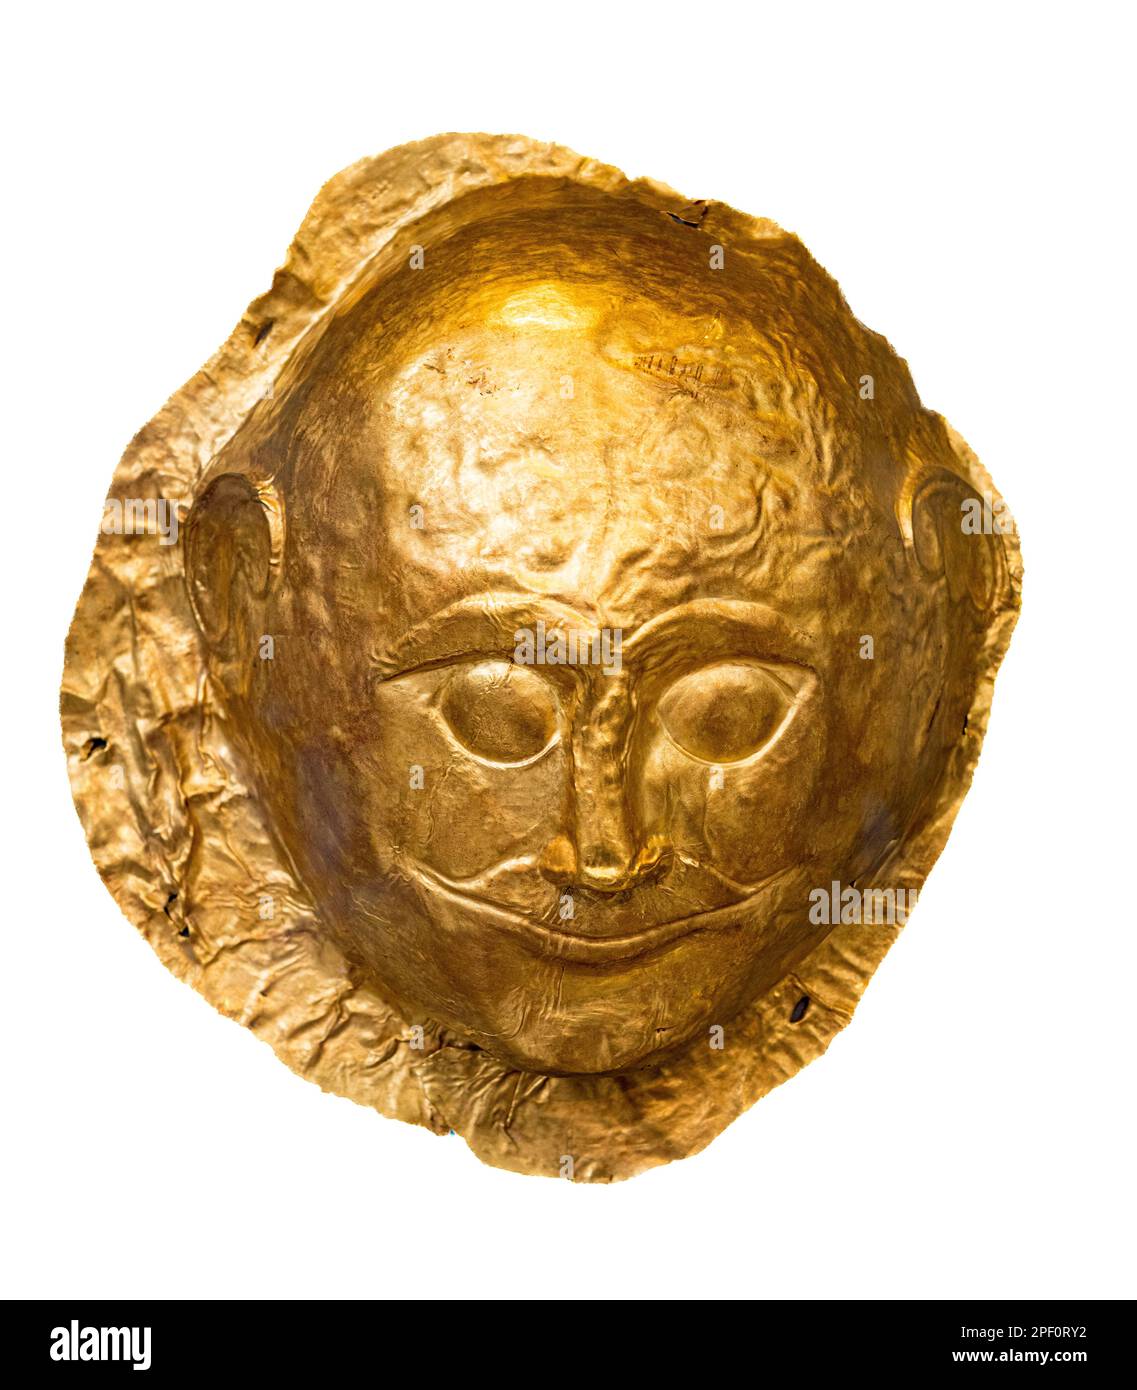 A 16th Century BC,  gold, funerary mask from grave IV of grave circle A at Ancient Mycenae, Peloponnese, Greece. Stock Photo